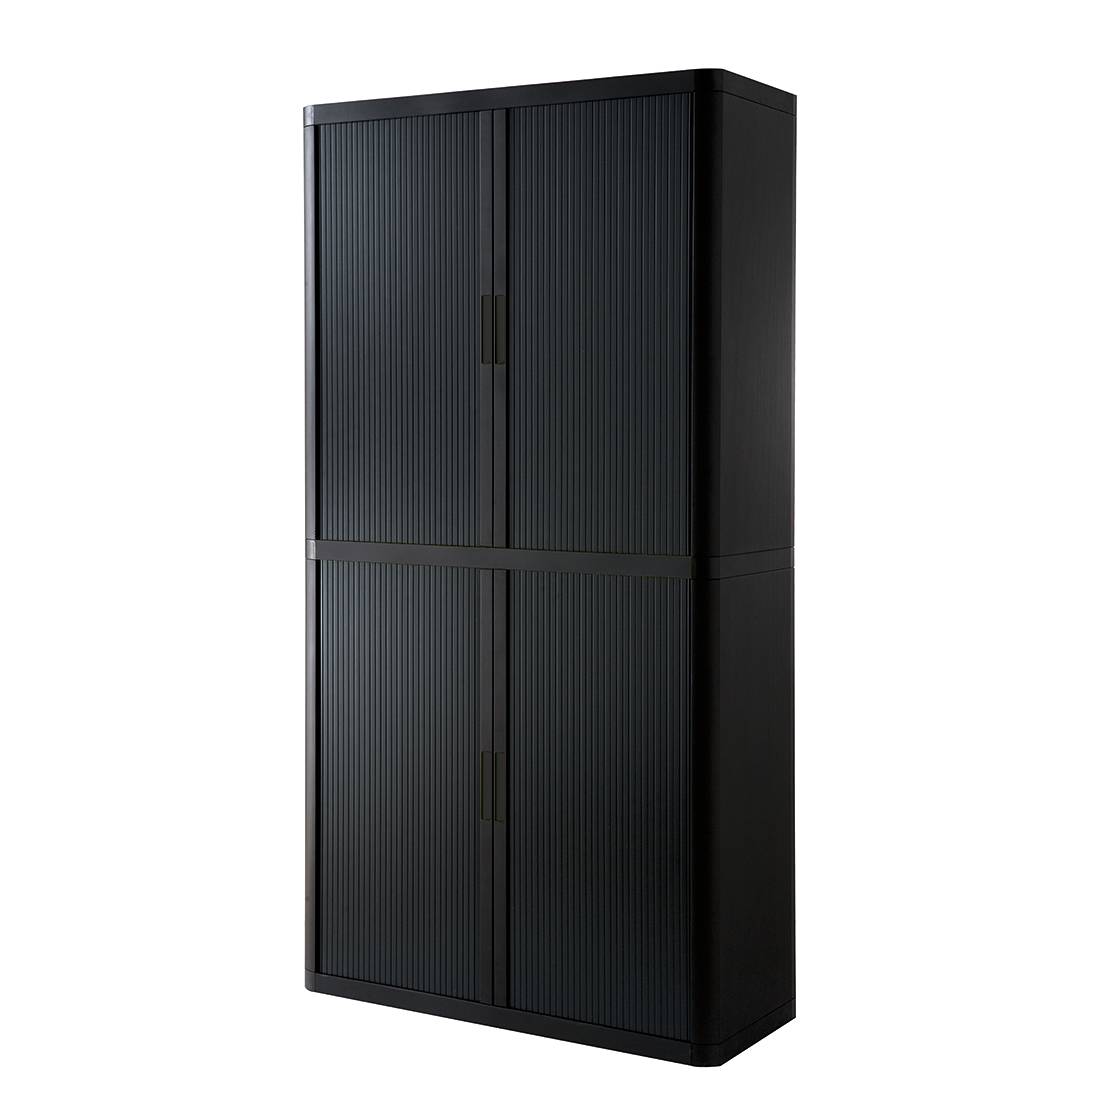 Image of Armoire à dossiers easyOffice 000000001000071288